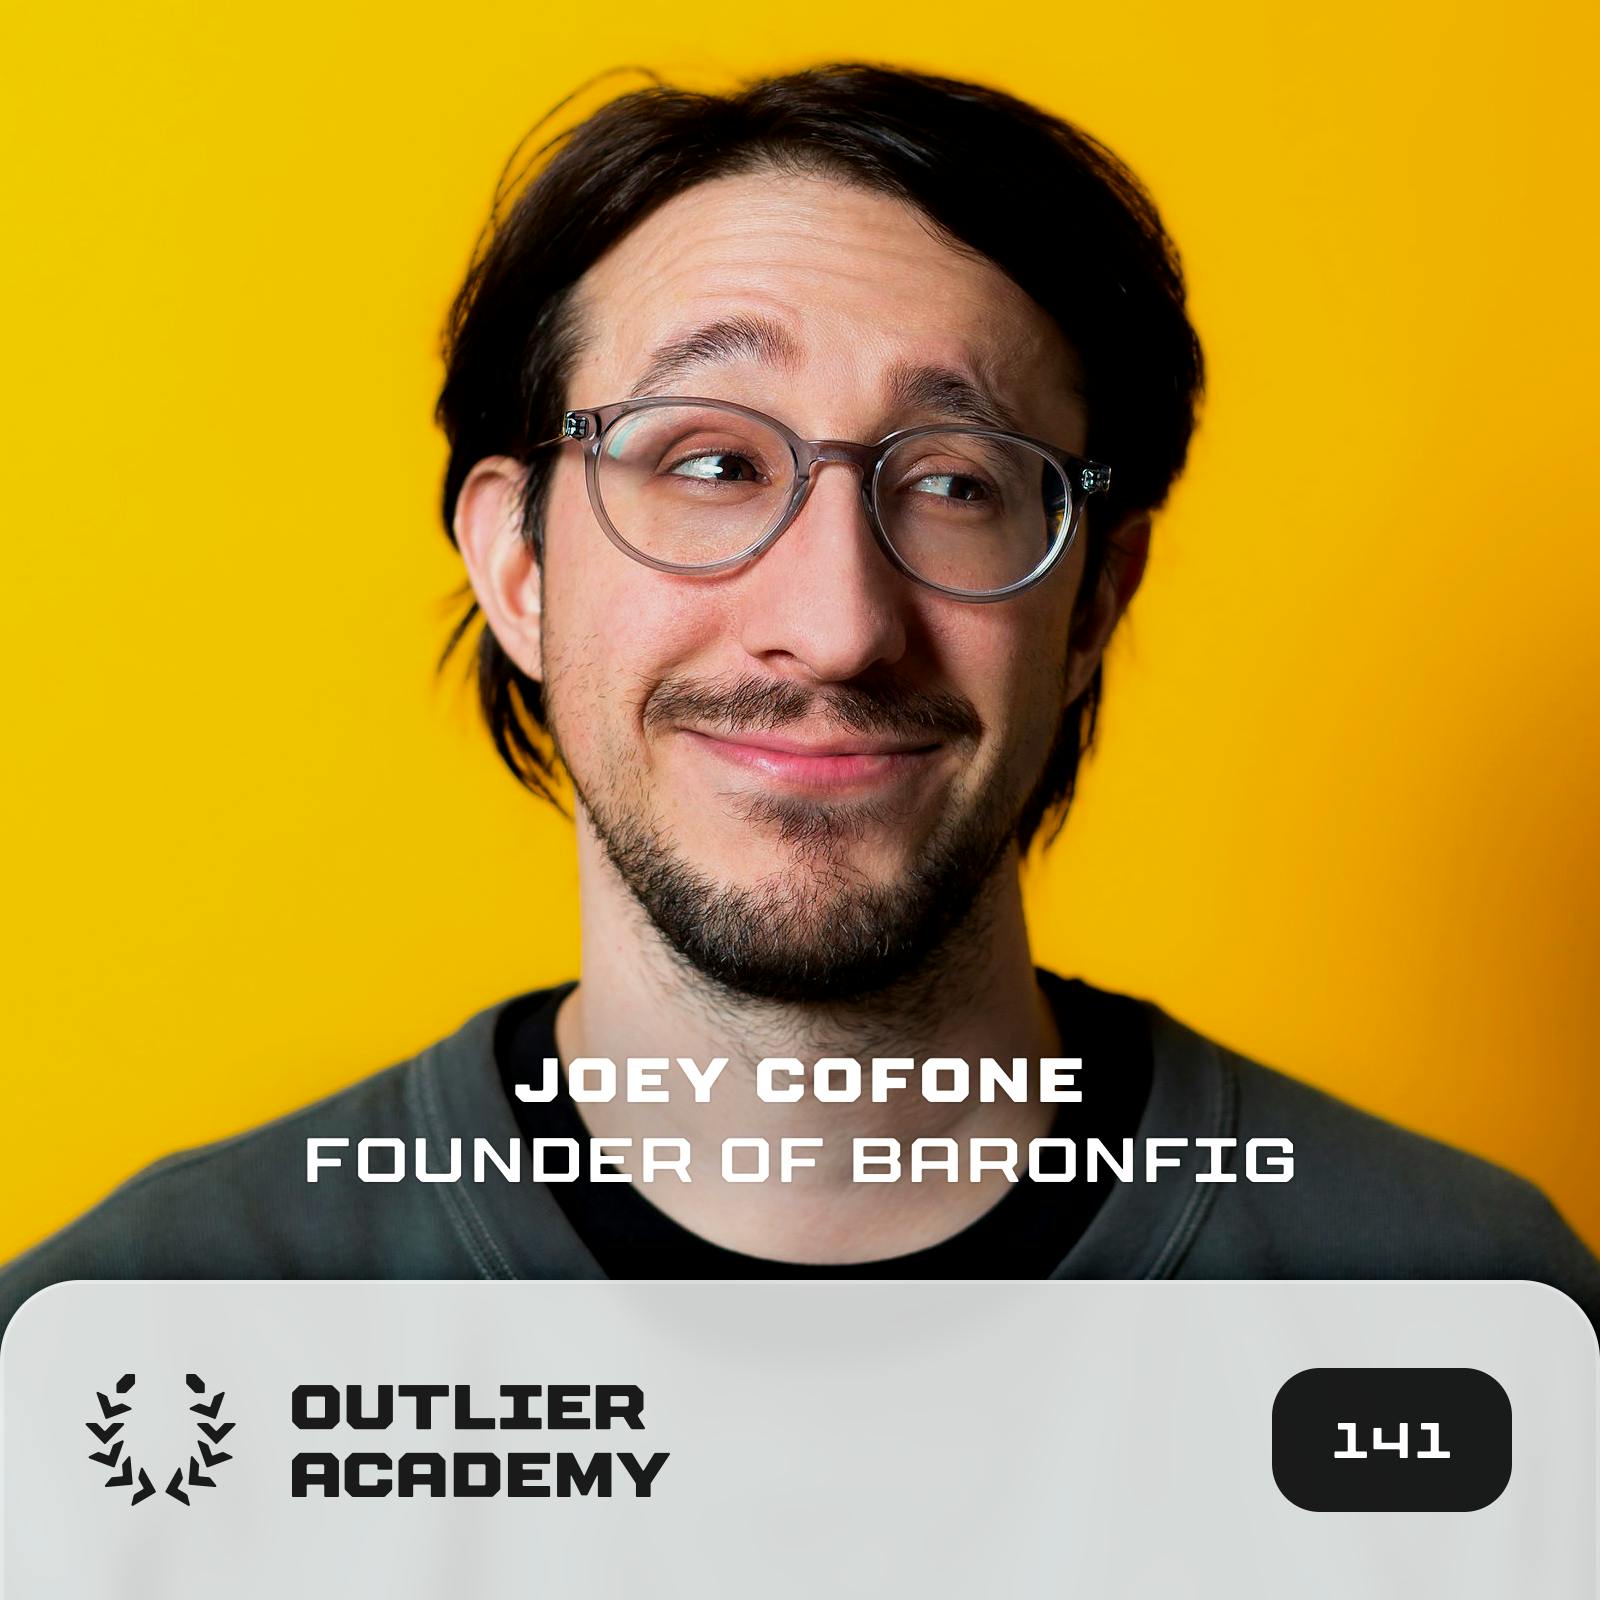 #141 Joey Cofone, Founder & CEO of Baronfig | Favorite Baronfig Products, Skill vs Renown, Daily Disciplines, Favorite Books, and More Image